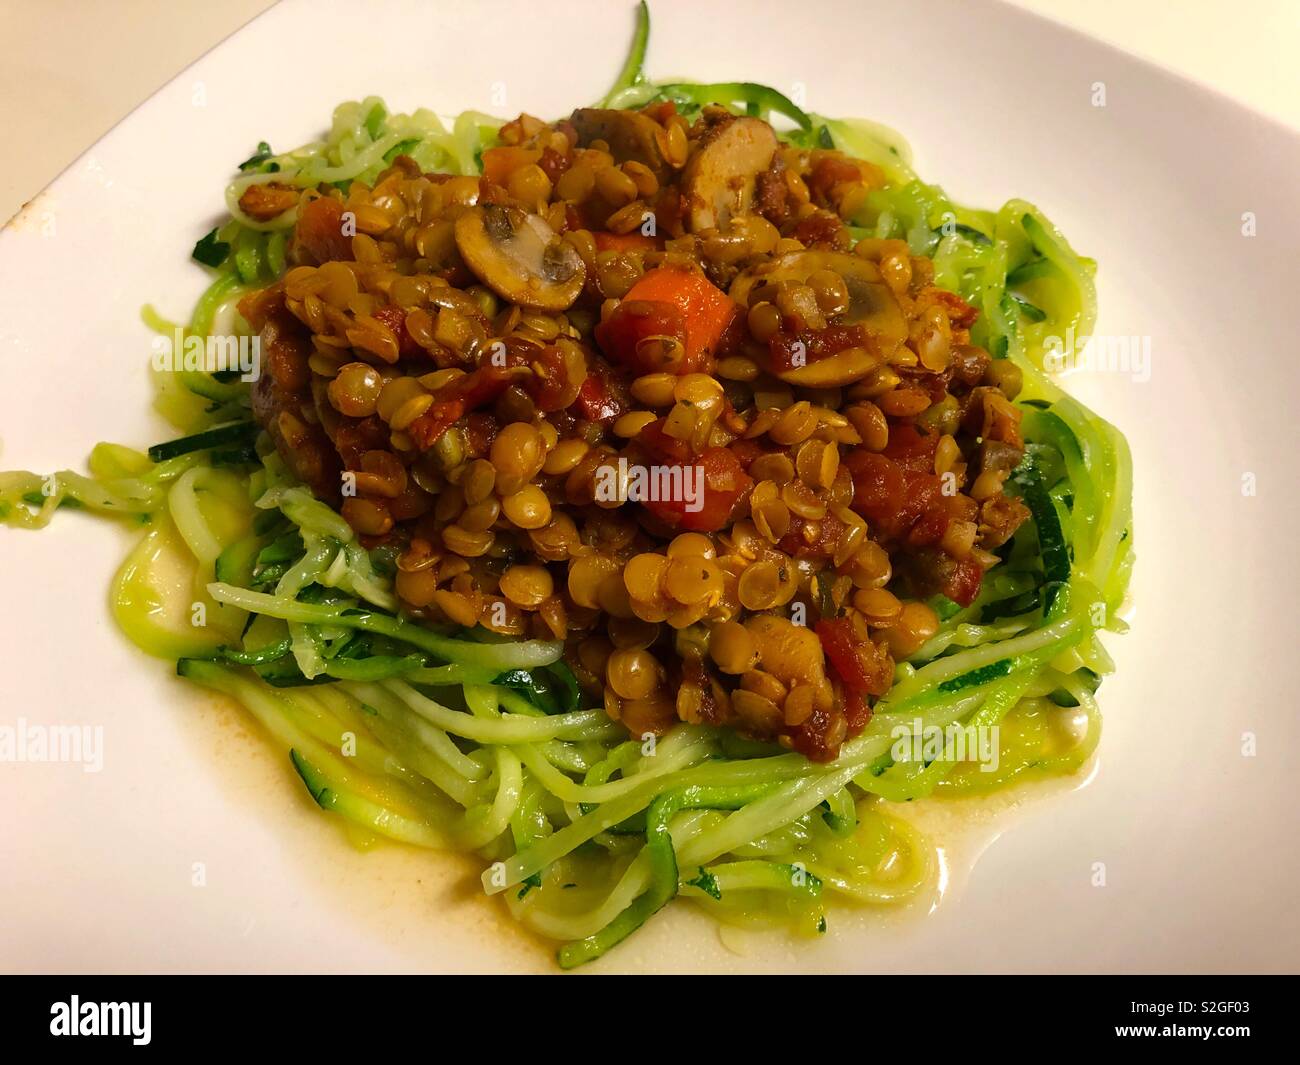 A healthy meal of vegetables and lentils in a tomato sauce over a bed of shredded zucchini ( couchette.) Stock Photo